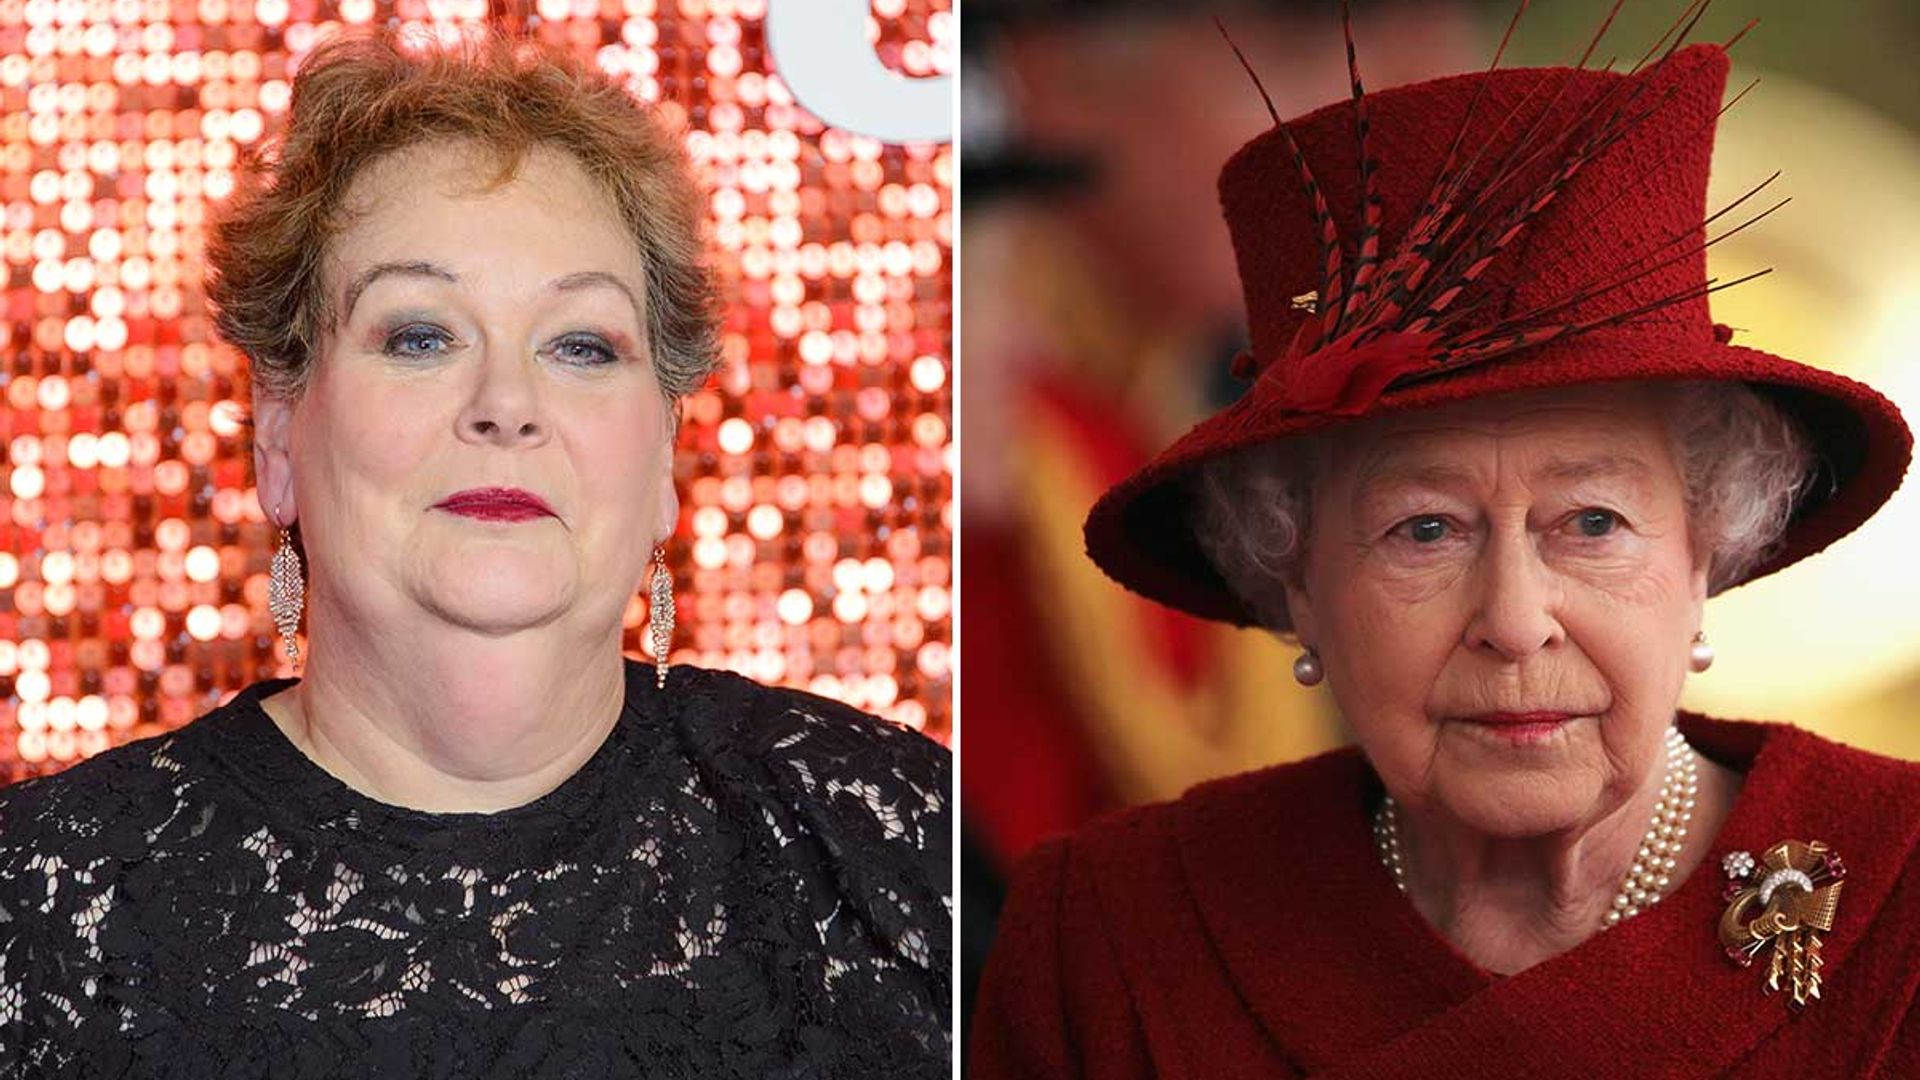 DNA journey: Anne Hegerty's surprising family ties to the Queen explained